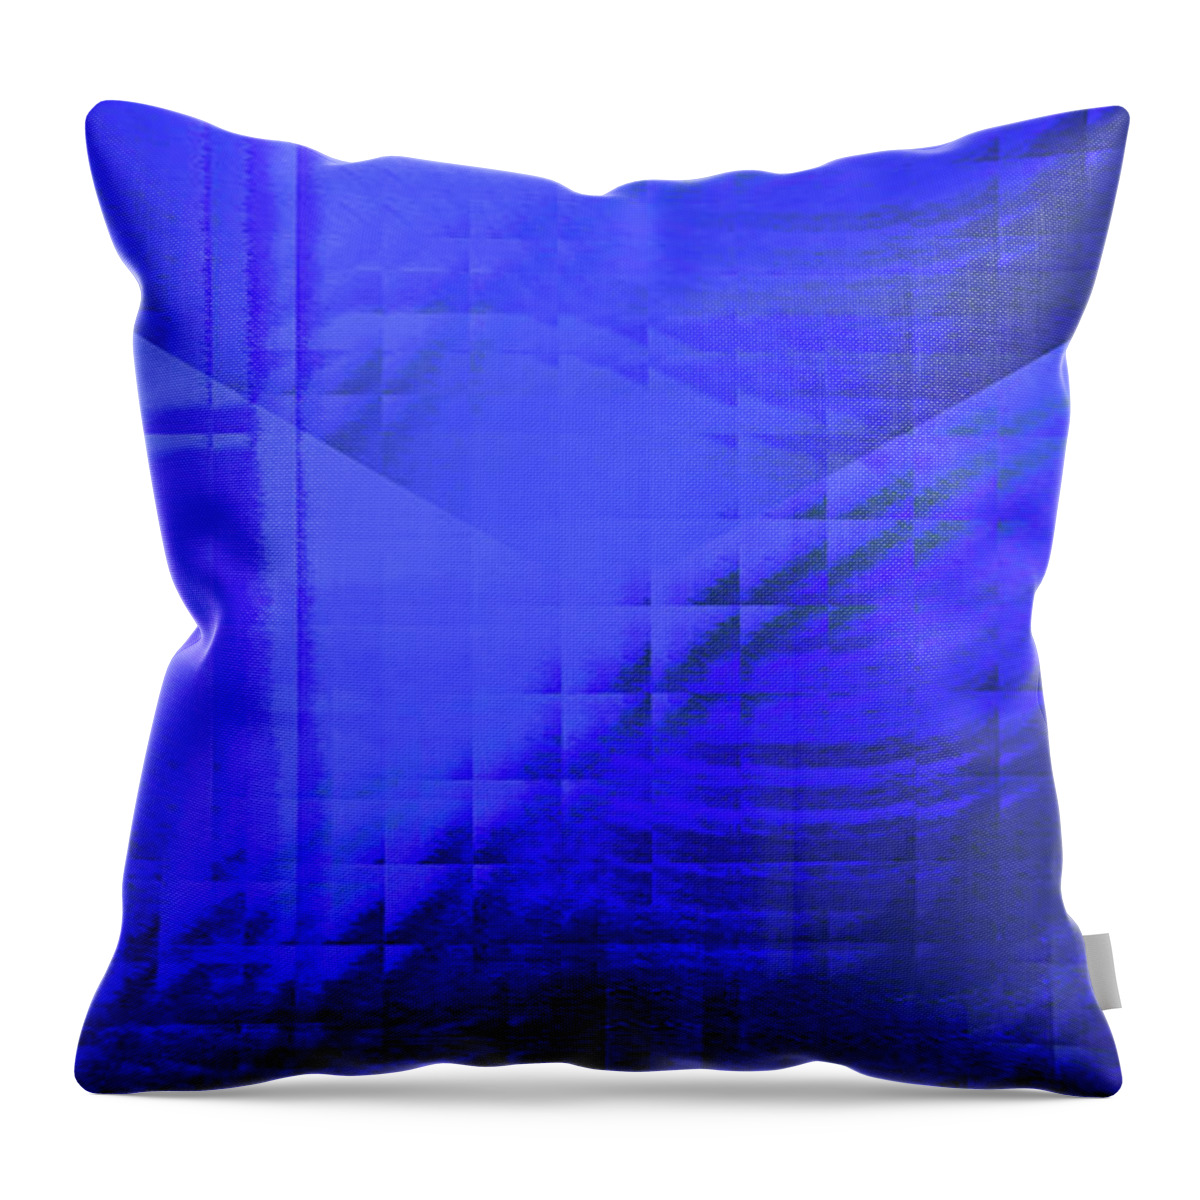 Vision Squared Throw Pillow featuring the digital art Vision Squared by James Temple